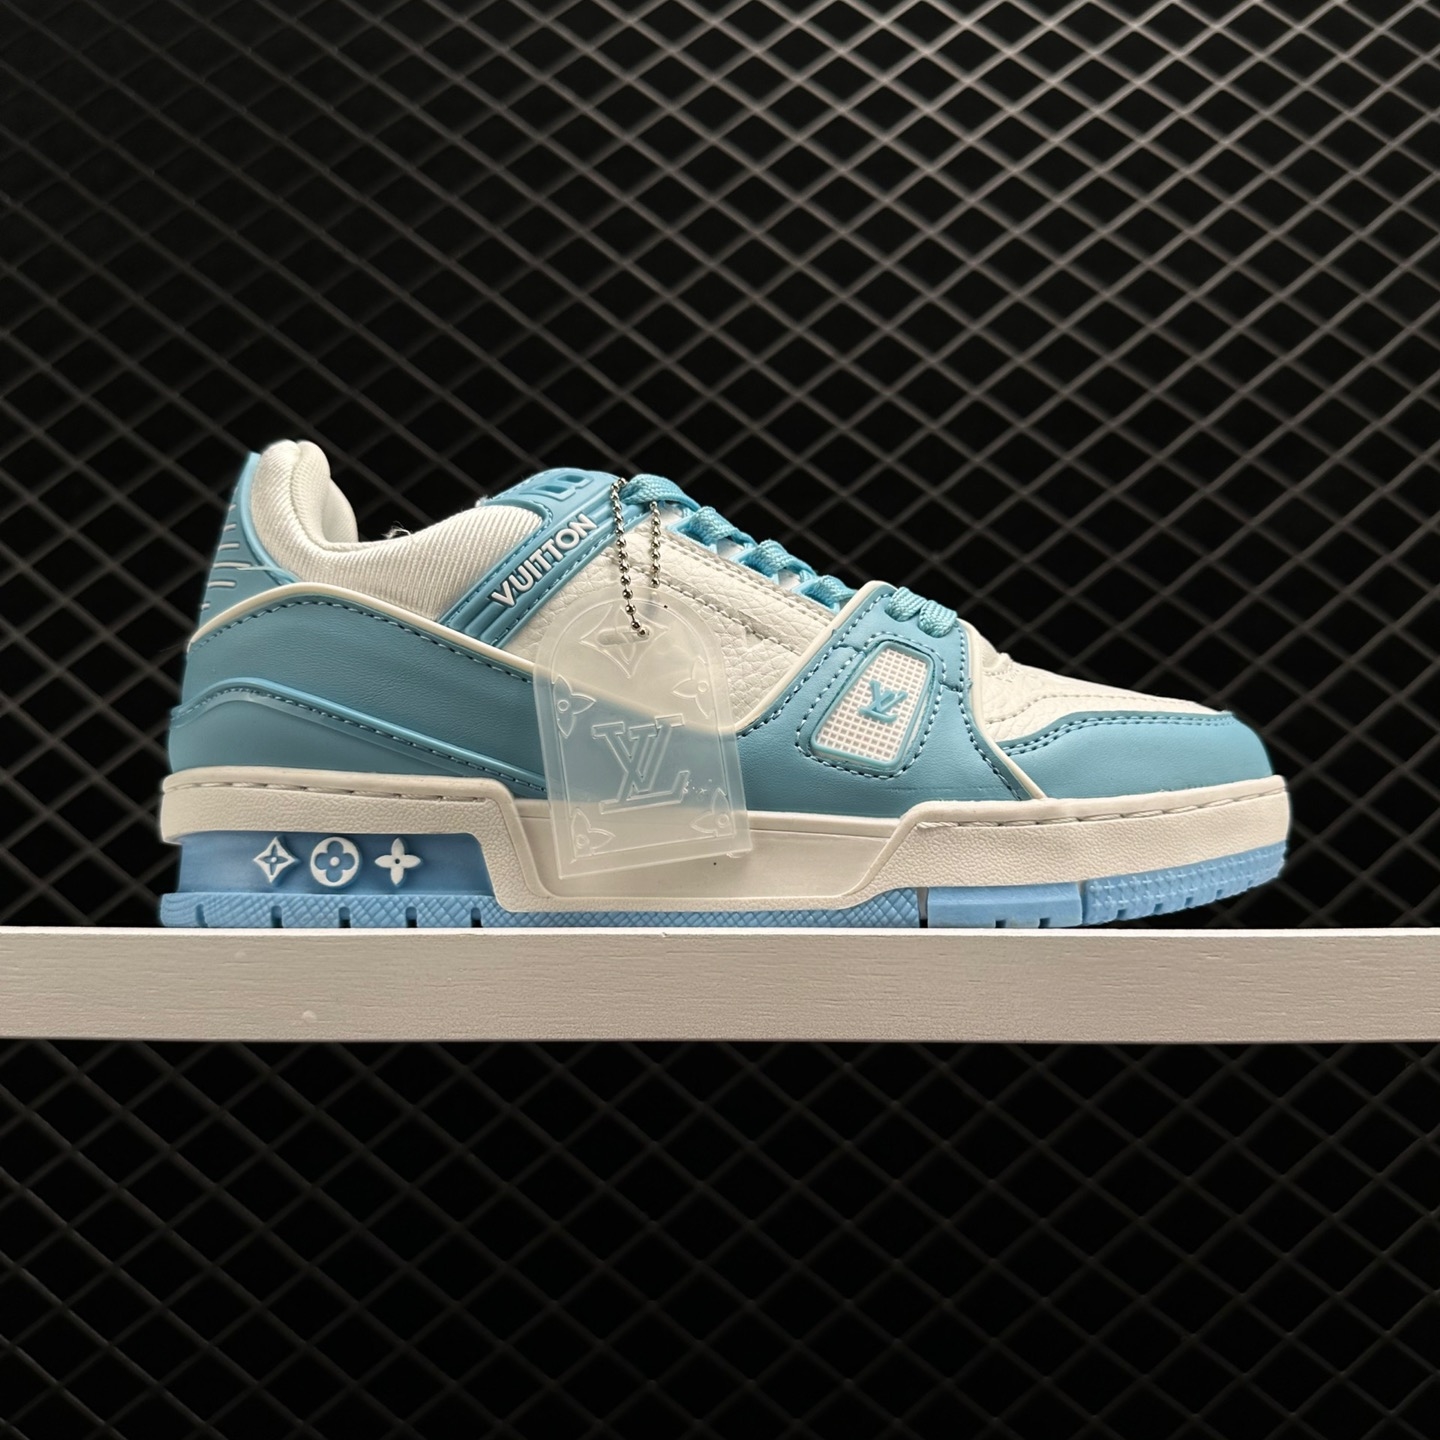 Louis Vuitton Trainer Low White Sky Blue 1AA6X4 - Style, Elegance, and Luxury